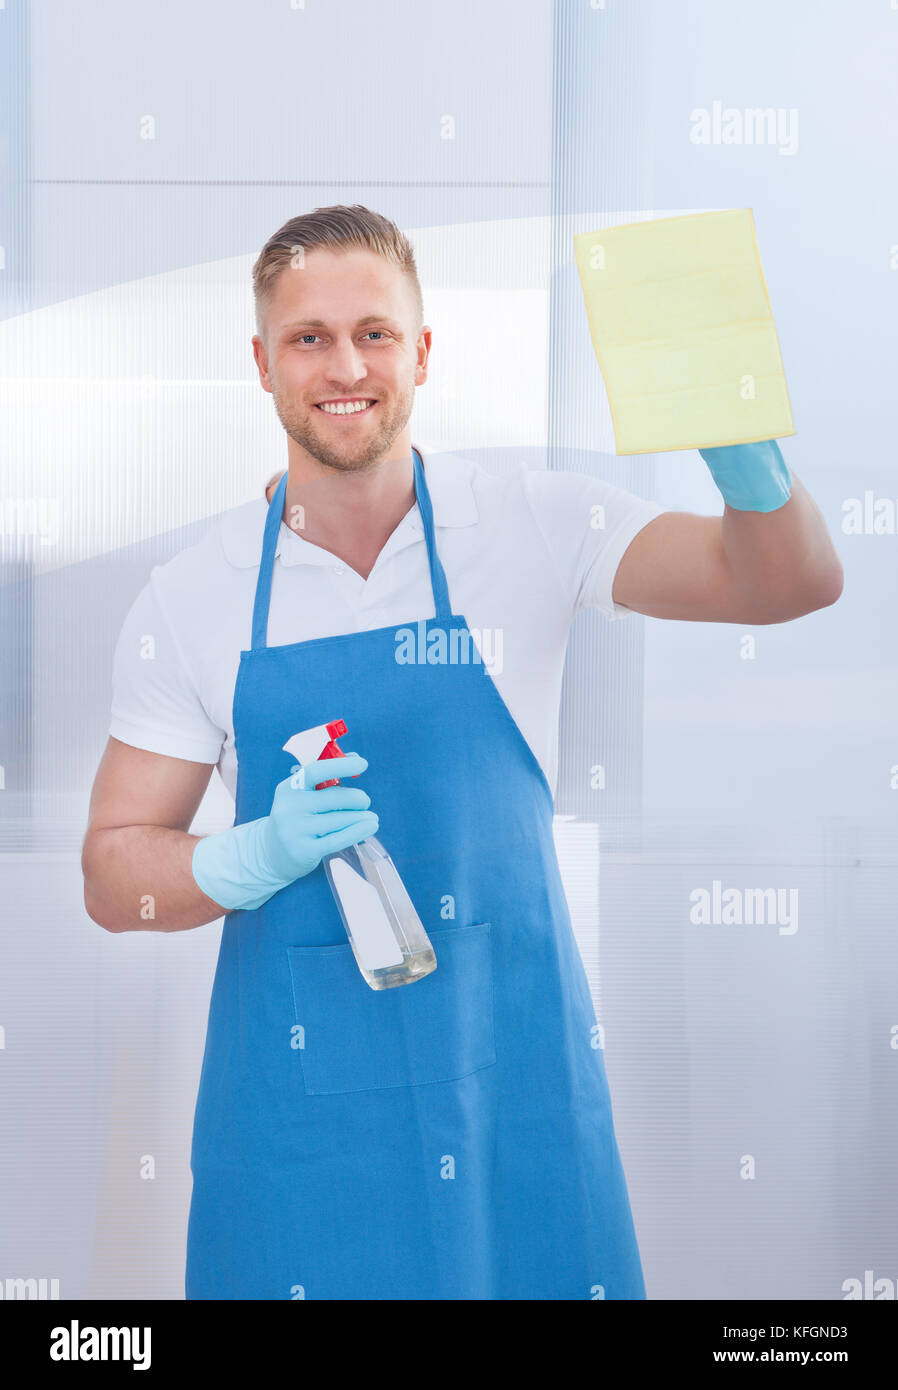 Friendly smiling male cleaner cleaning a pane of glass with a spray bottle and cloth in an office building Stock Photo